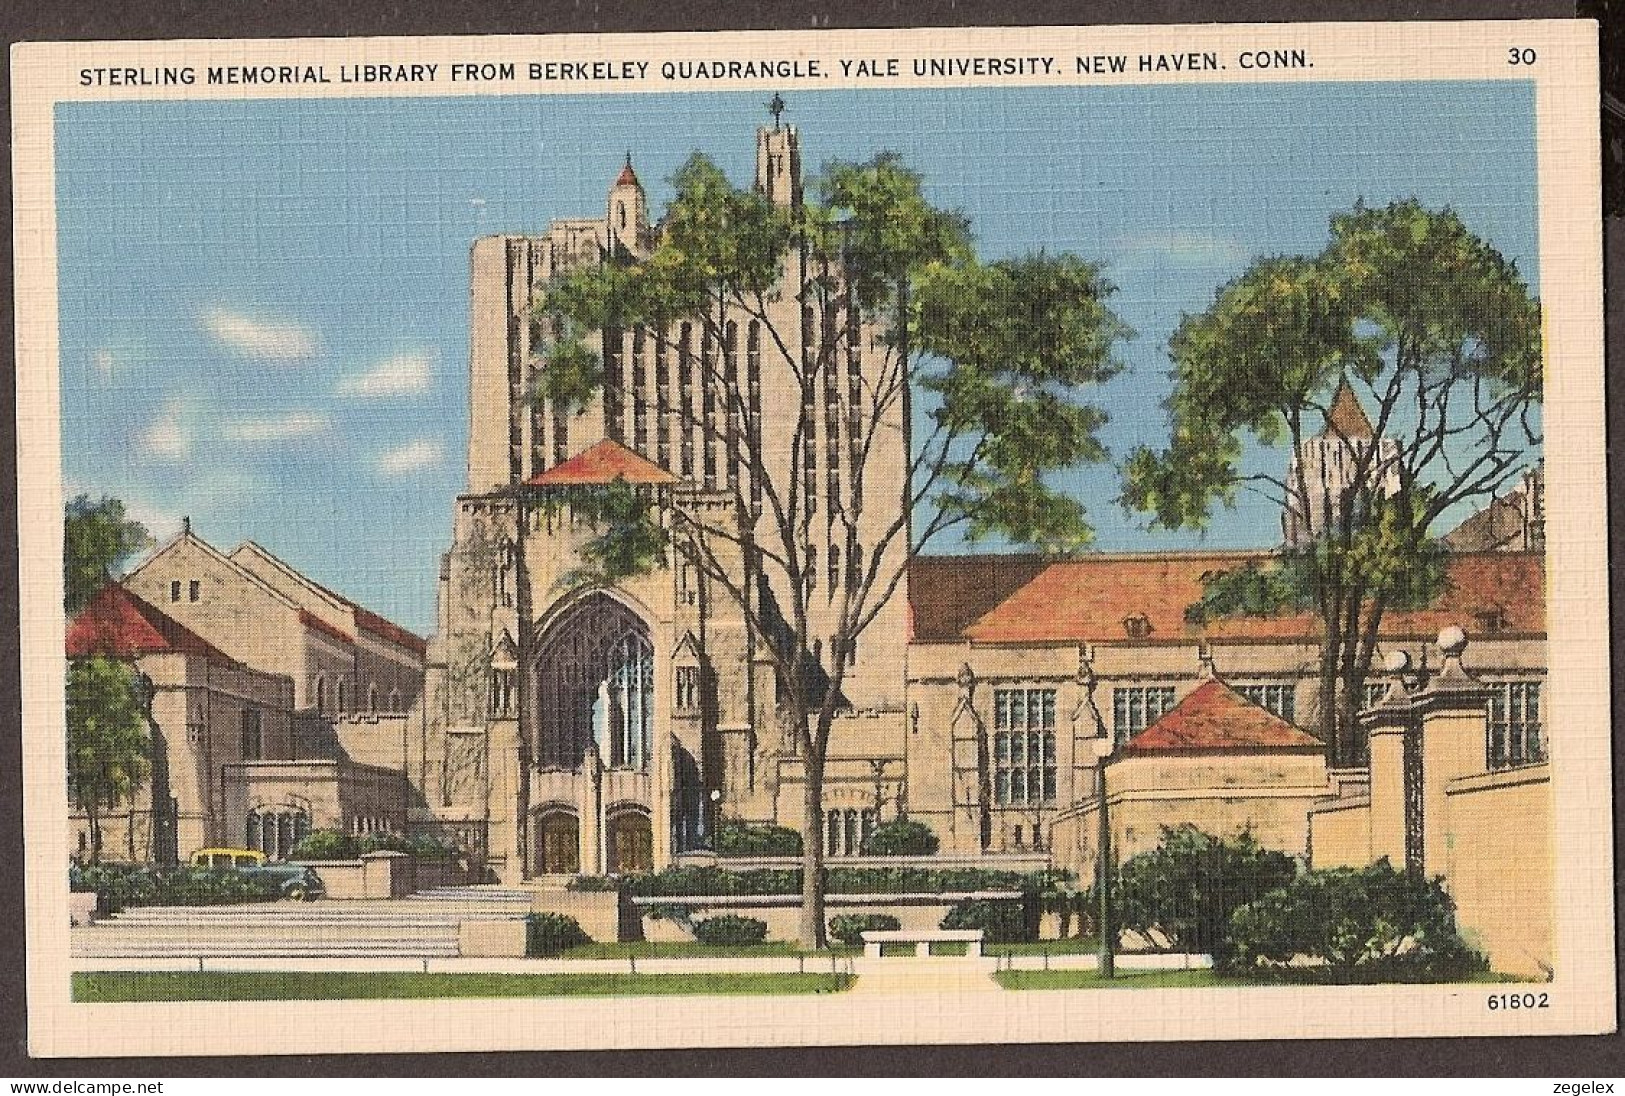 New Haven, Connecticut - Sterling Memorial Library, Yale University 1940 - New Haven